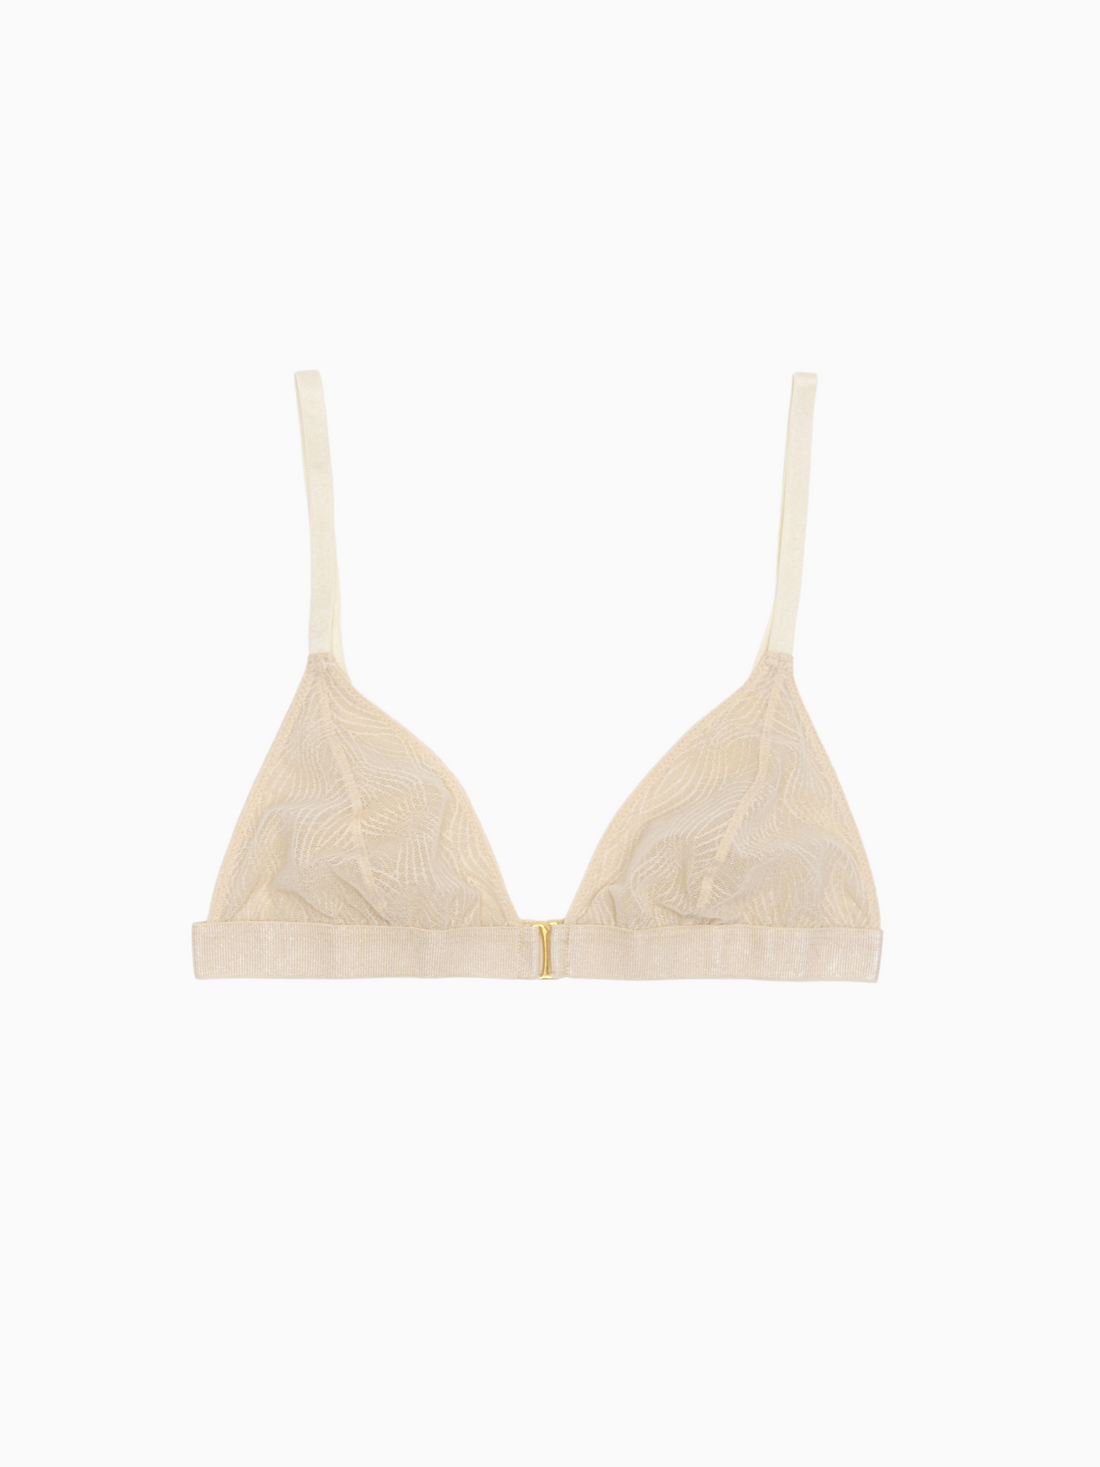 Shoppers *Love* This $20 Underwire Bra - SHEfinds